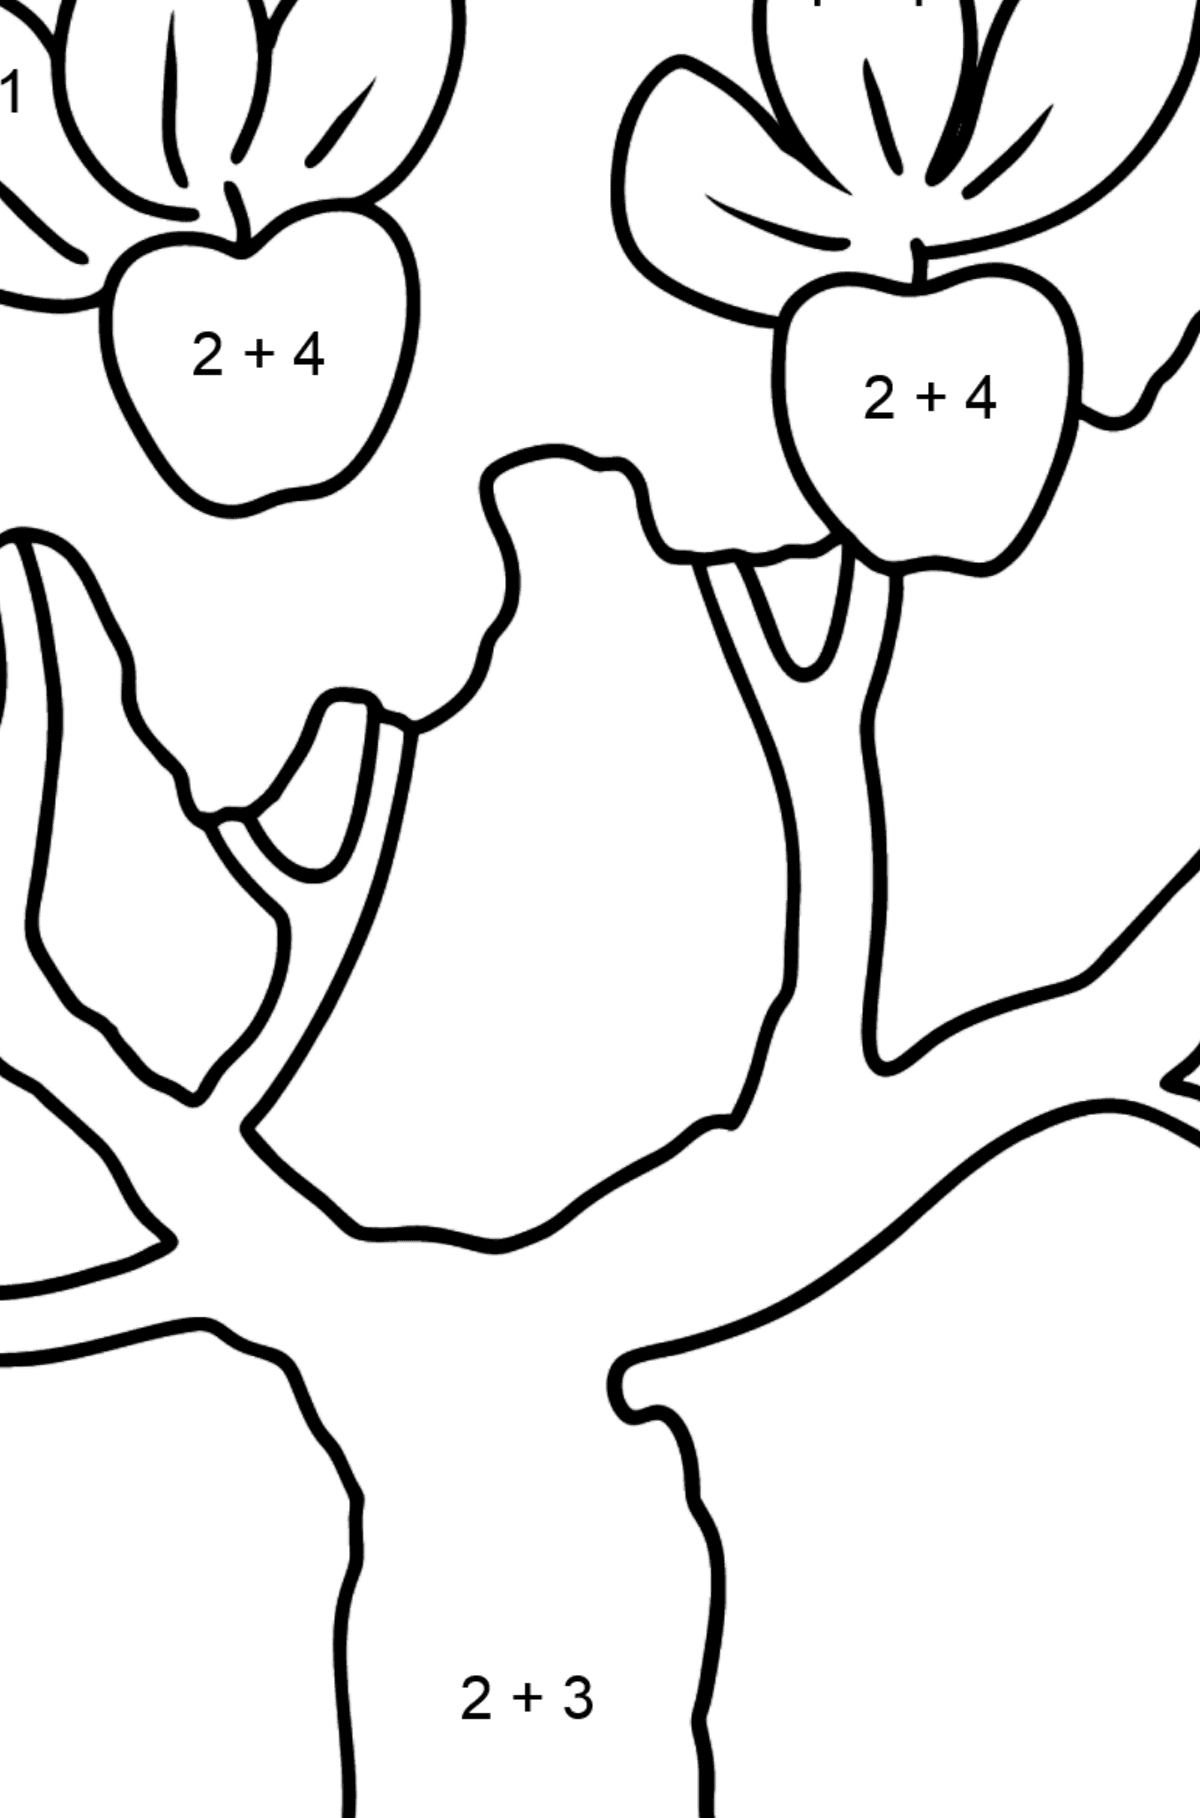 Apple Tree coloring page - Math Coloring - Addition for Kids